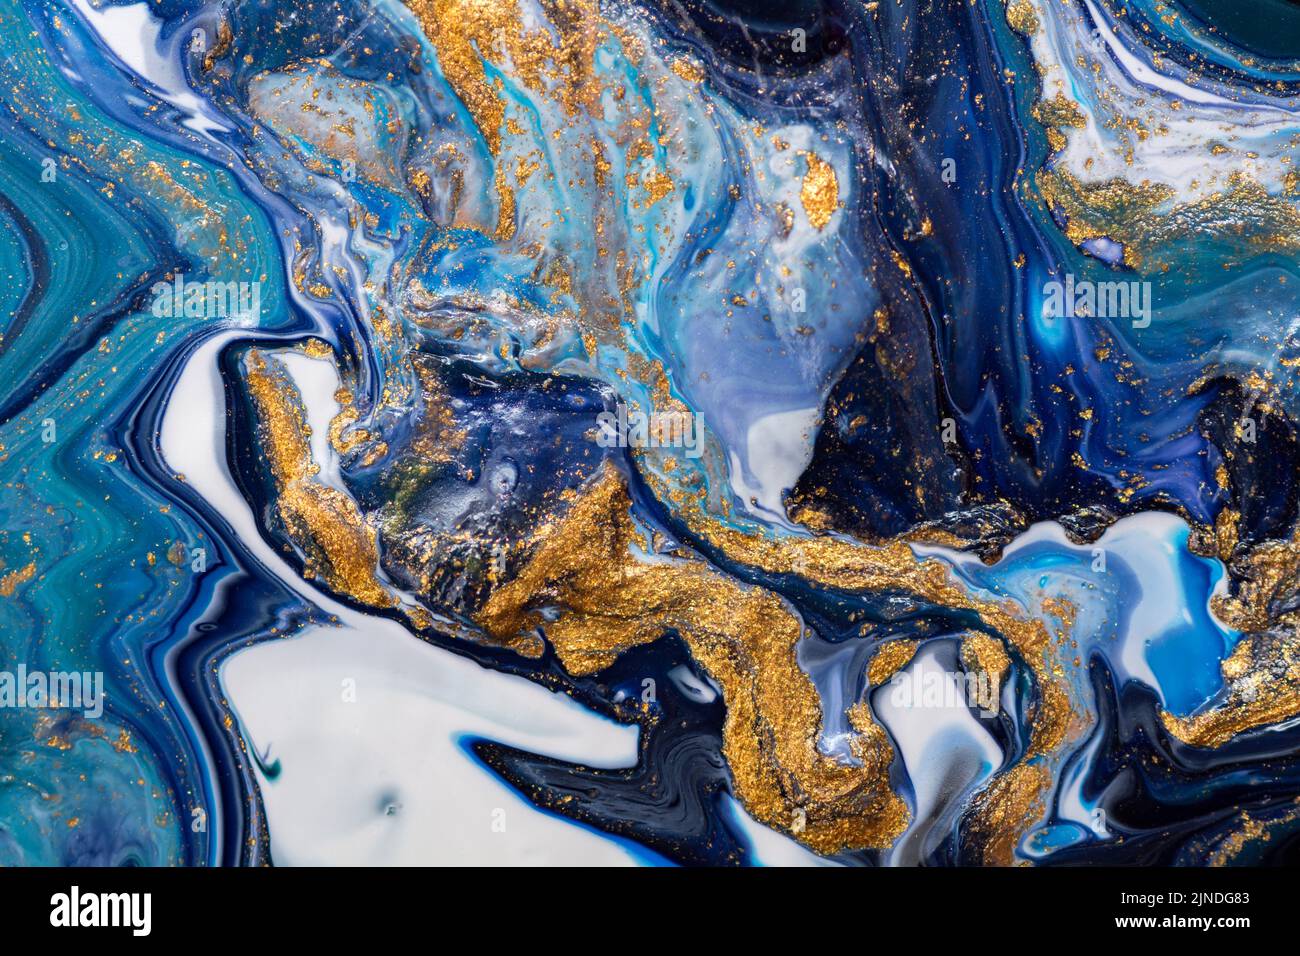 Luxury abstract fluid art painting background. Spilled blue, white and gold acrylic paint. Stock Photo